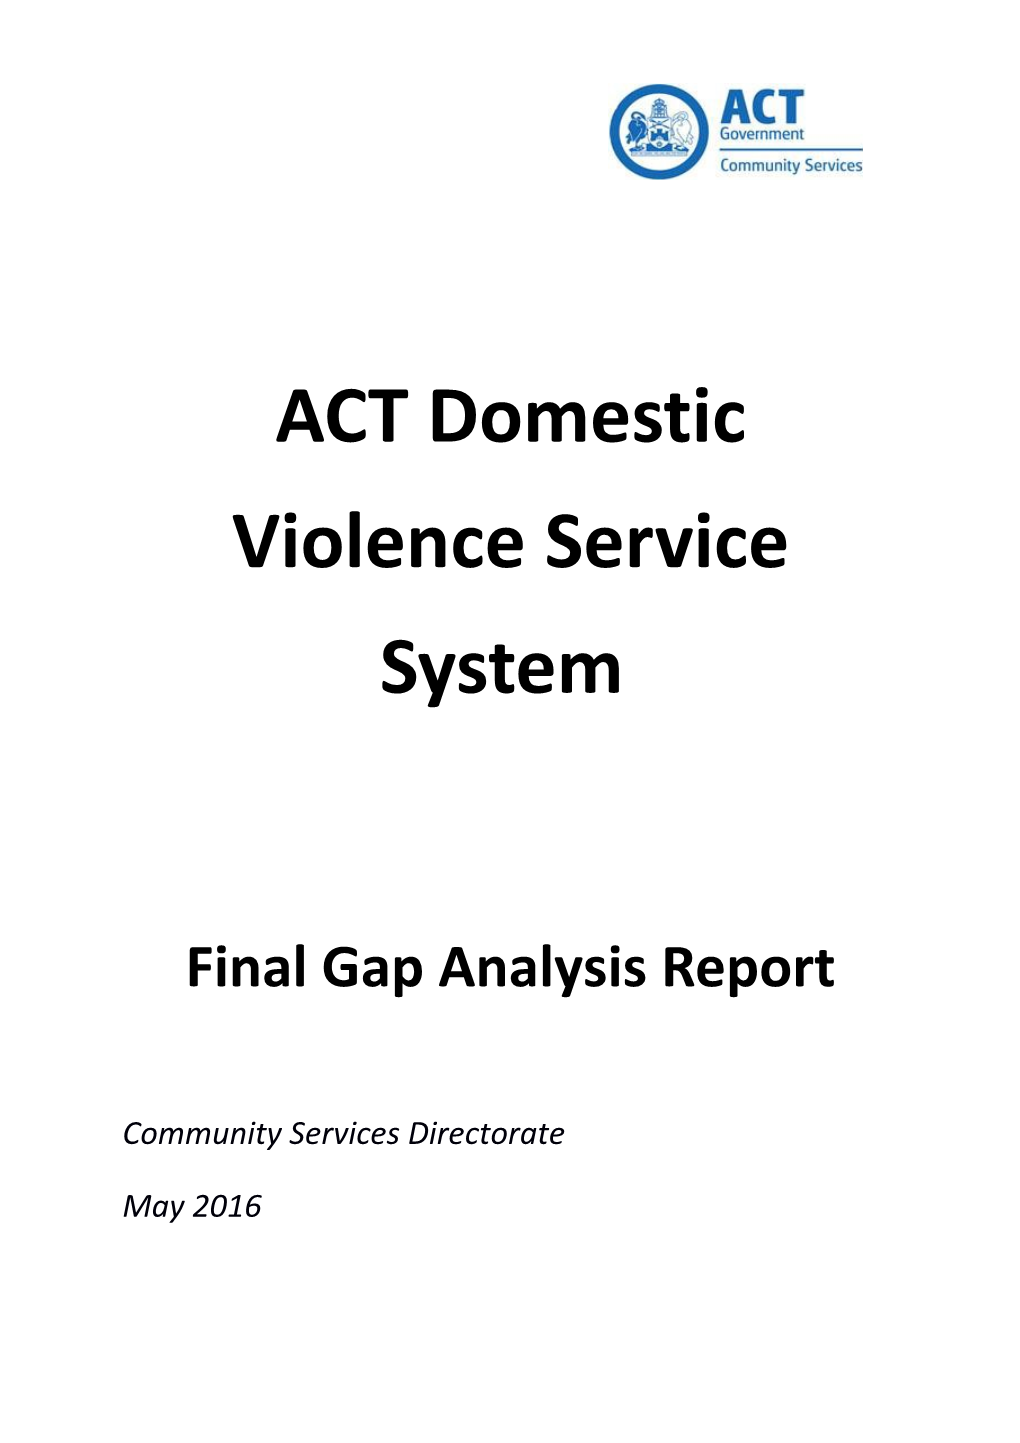 ACT Domestic Violence Service System: Final Gap Analysis Report